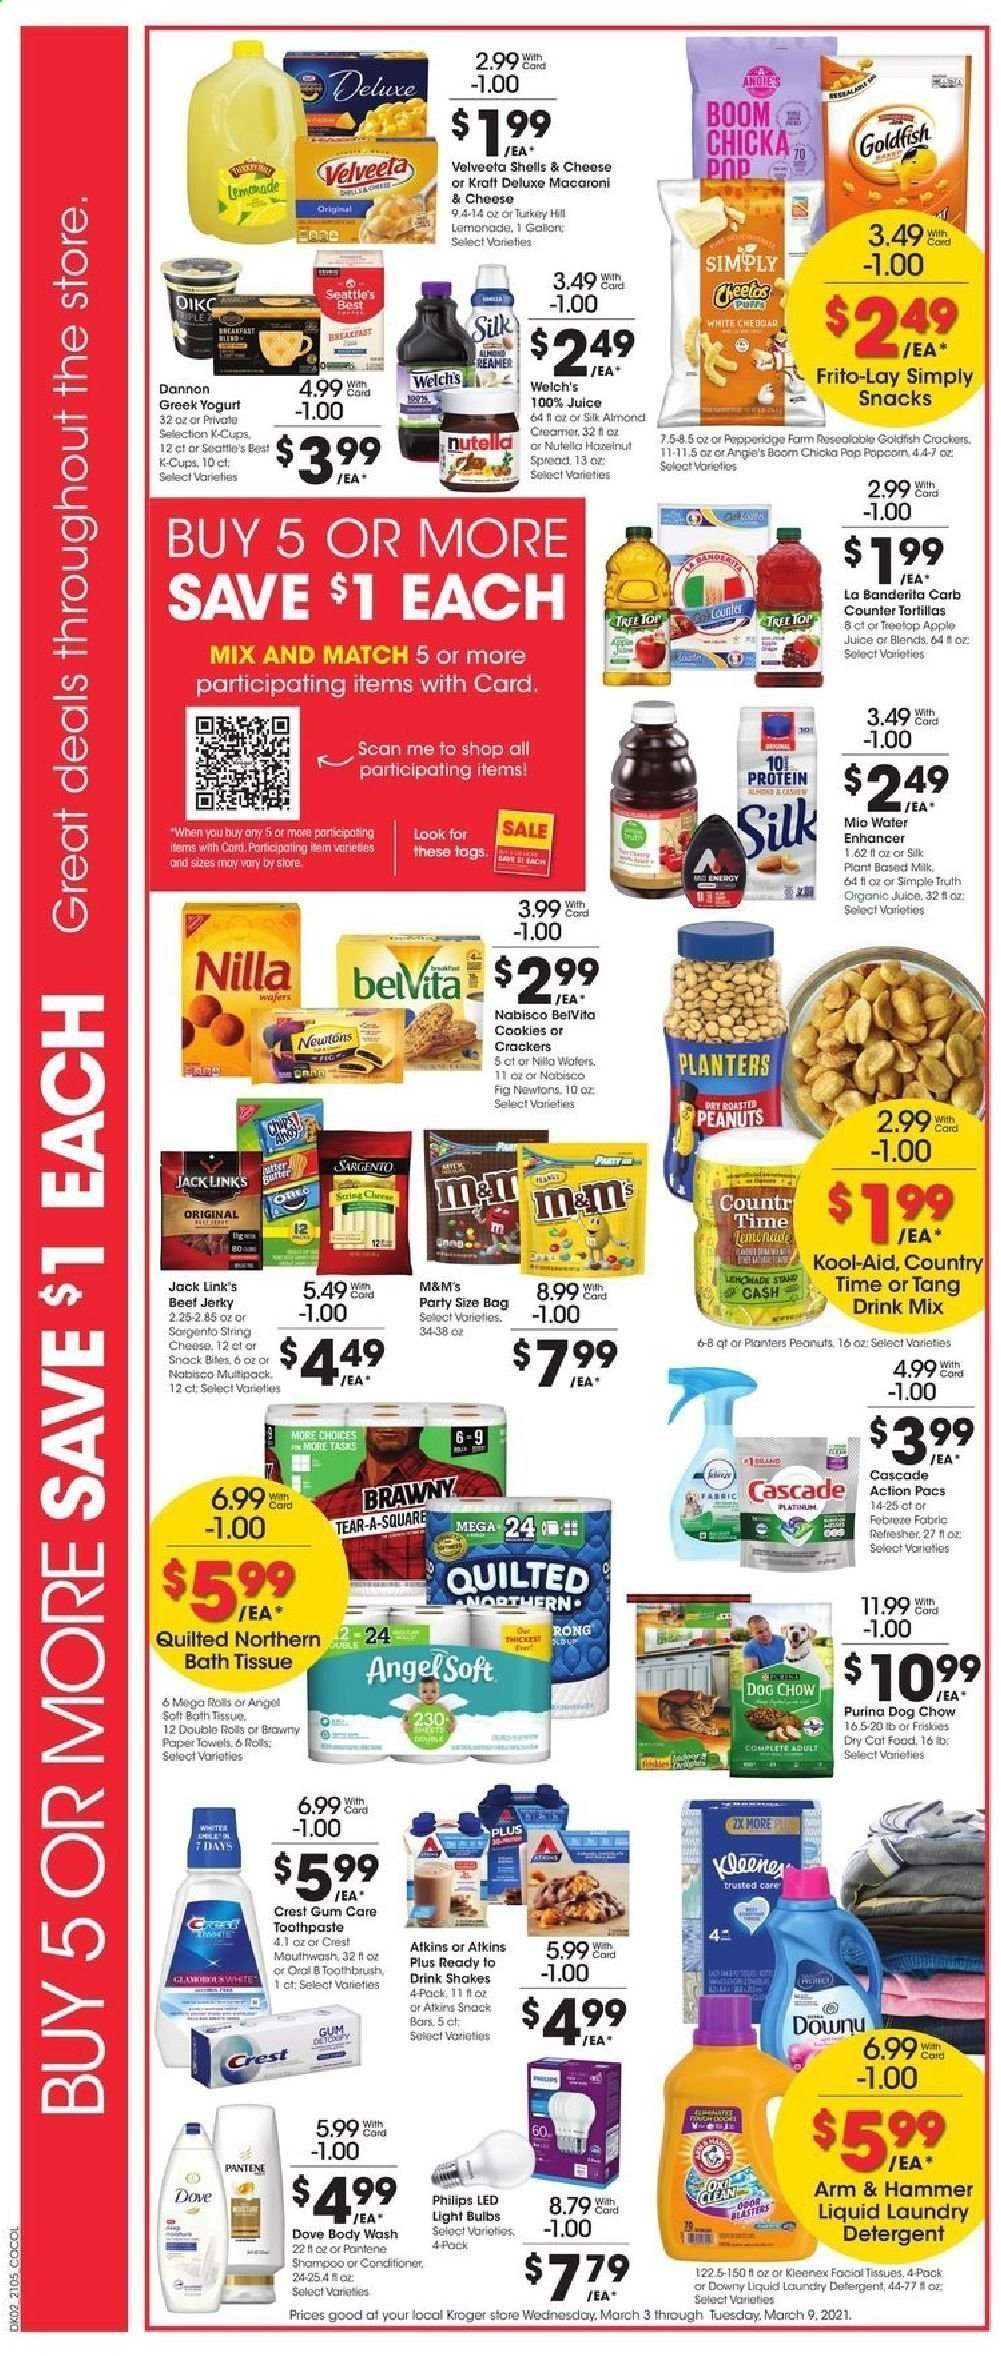 thumbnail - Kroger Flyer - 03/03/2021 - 03/09/2021 - Sales products - Philips, Apple, tortillas, 7 Days, macaroni & cheese, Welch's, Kraft®, beef jerky, jerky, Sargento, greek yoghurt, Oreo, yoghurt, Dannon, milk, shake, creamer, almond creamer, cookies, wafers, Nutella, M&M's, crackers, snack bar, snack, Goldfish, Frito-Lay, Jack Link's, ARM & HAMMER, belVita, hazelnut spread, peanuts, Planters, apple juice, lemonade, juice, Country Time, coffee capsules, K-Cups, Dove, bath tissue, Kleenex, Quilted Northern, kitchen towels, paper towels, detergent, Febreze, Cascade, laundry detergent, body wash, shampoo, toothbrush, toothpaste, mouthwash, Crest, facial tissues, conditioner, Pantene, bulb, light bulb, animal food, cat food, Dog Chow, Purina, dry cat food, Friskies, bag, LED light. Page 3.